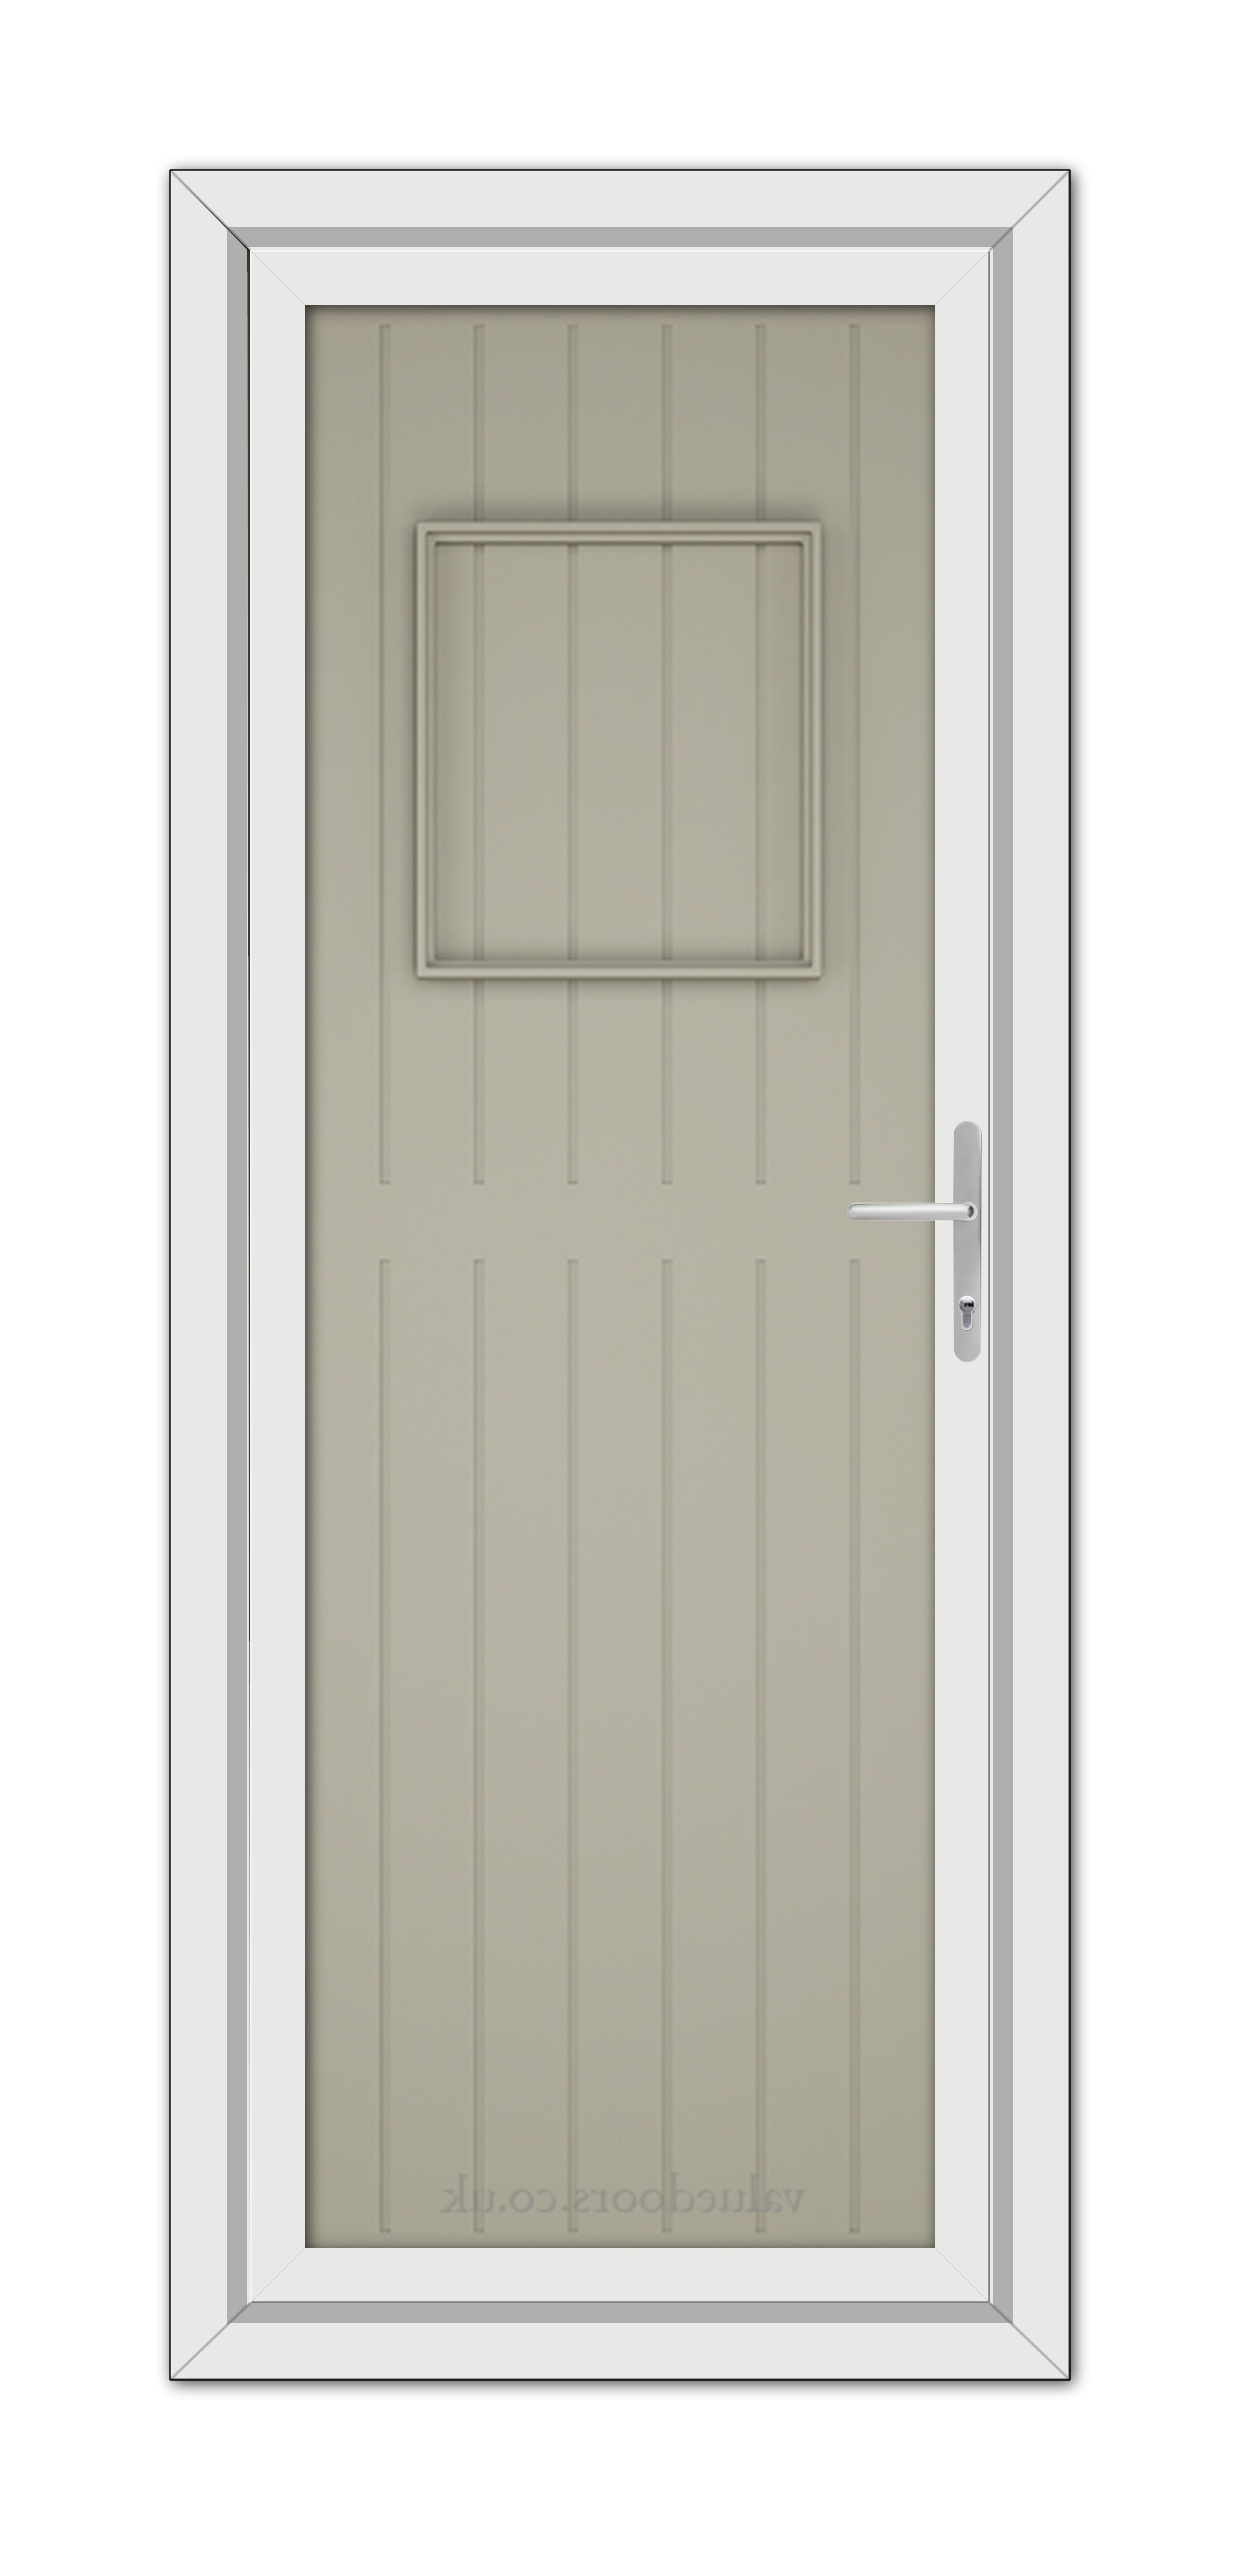 A modern pebble grey door with a small square window, featuring vertical paneling and a sleek silver handle, set within a white door frame.